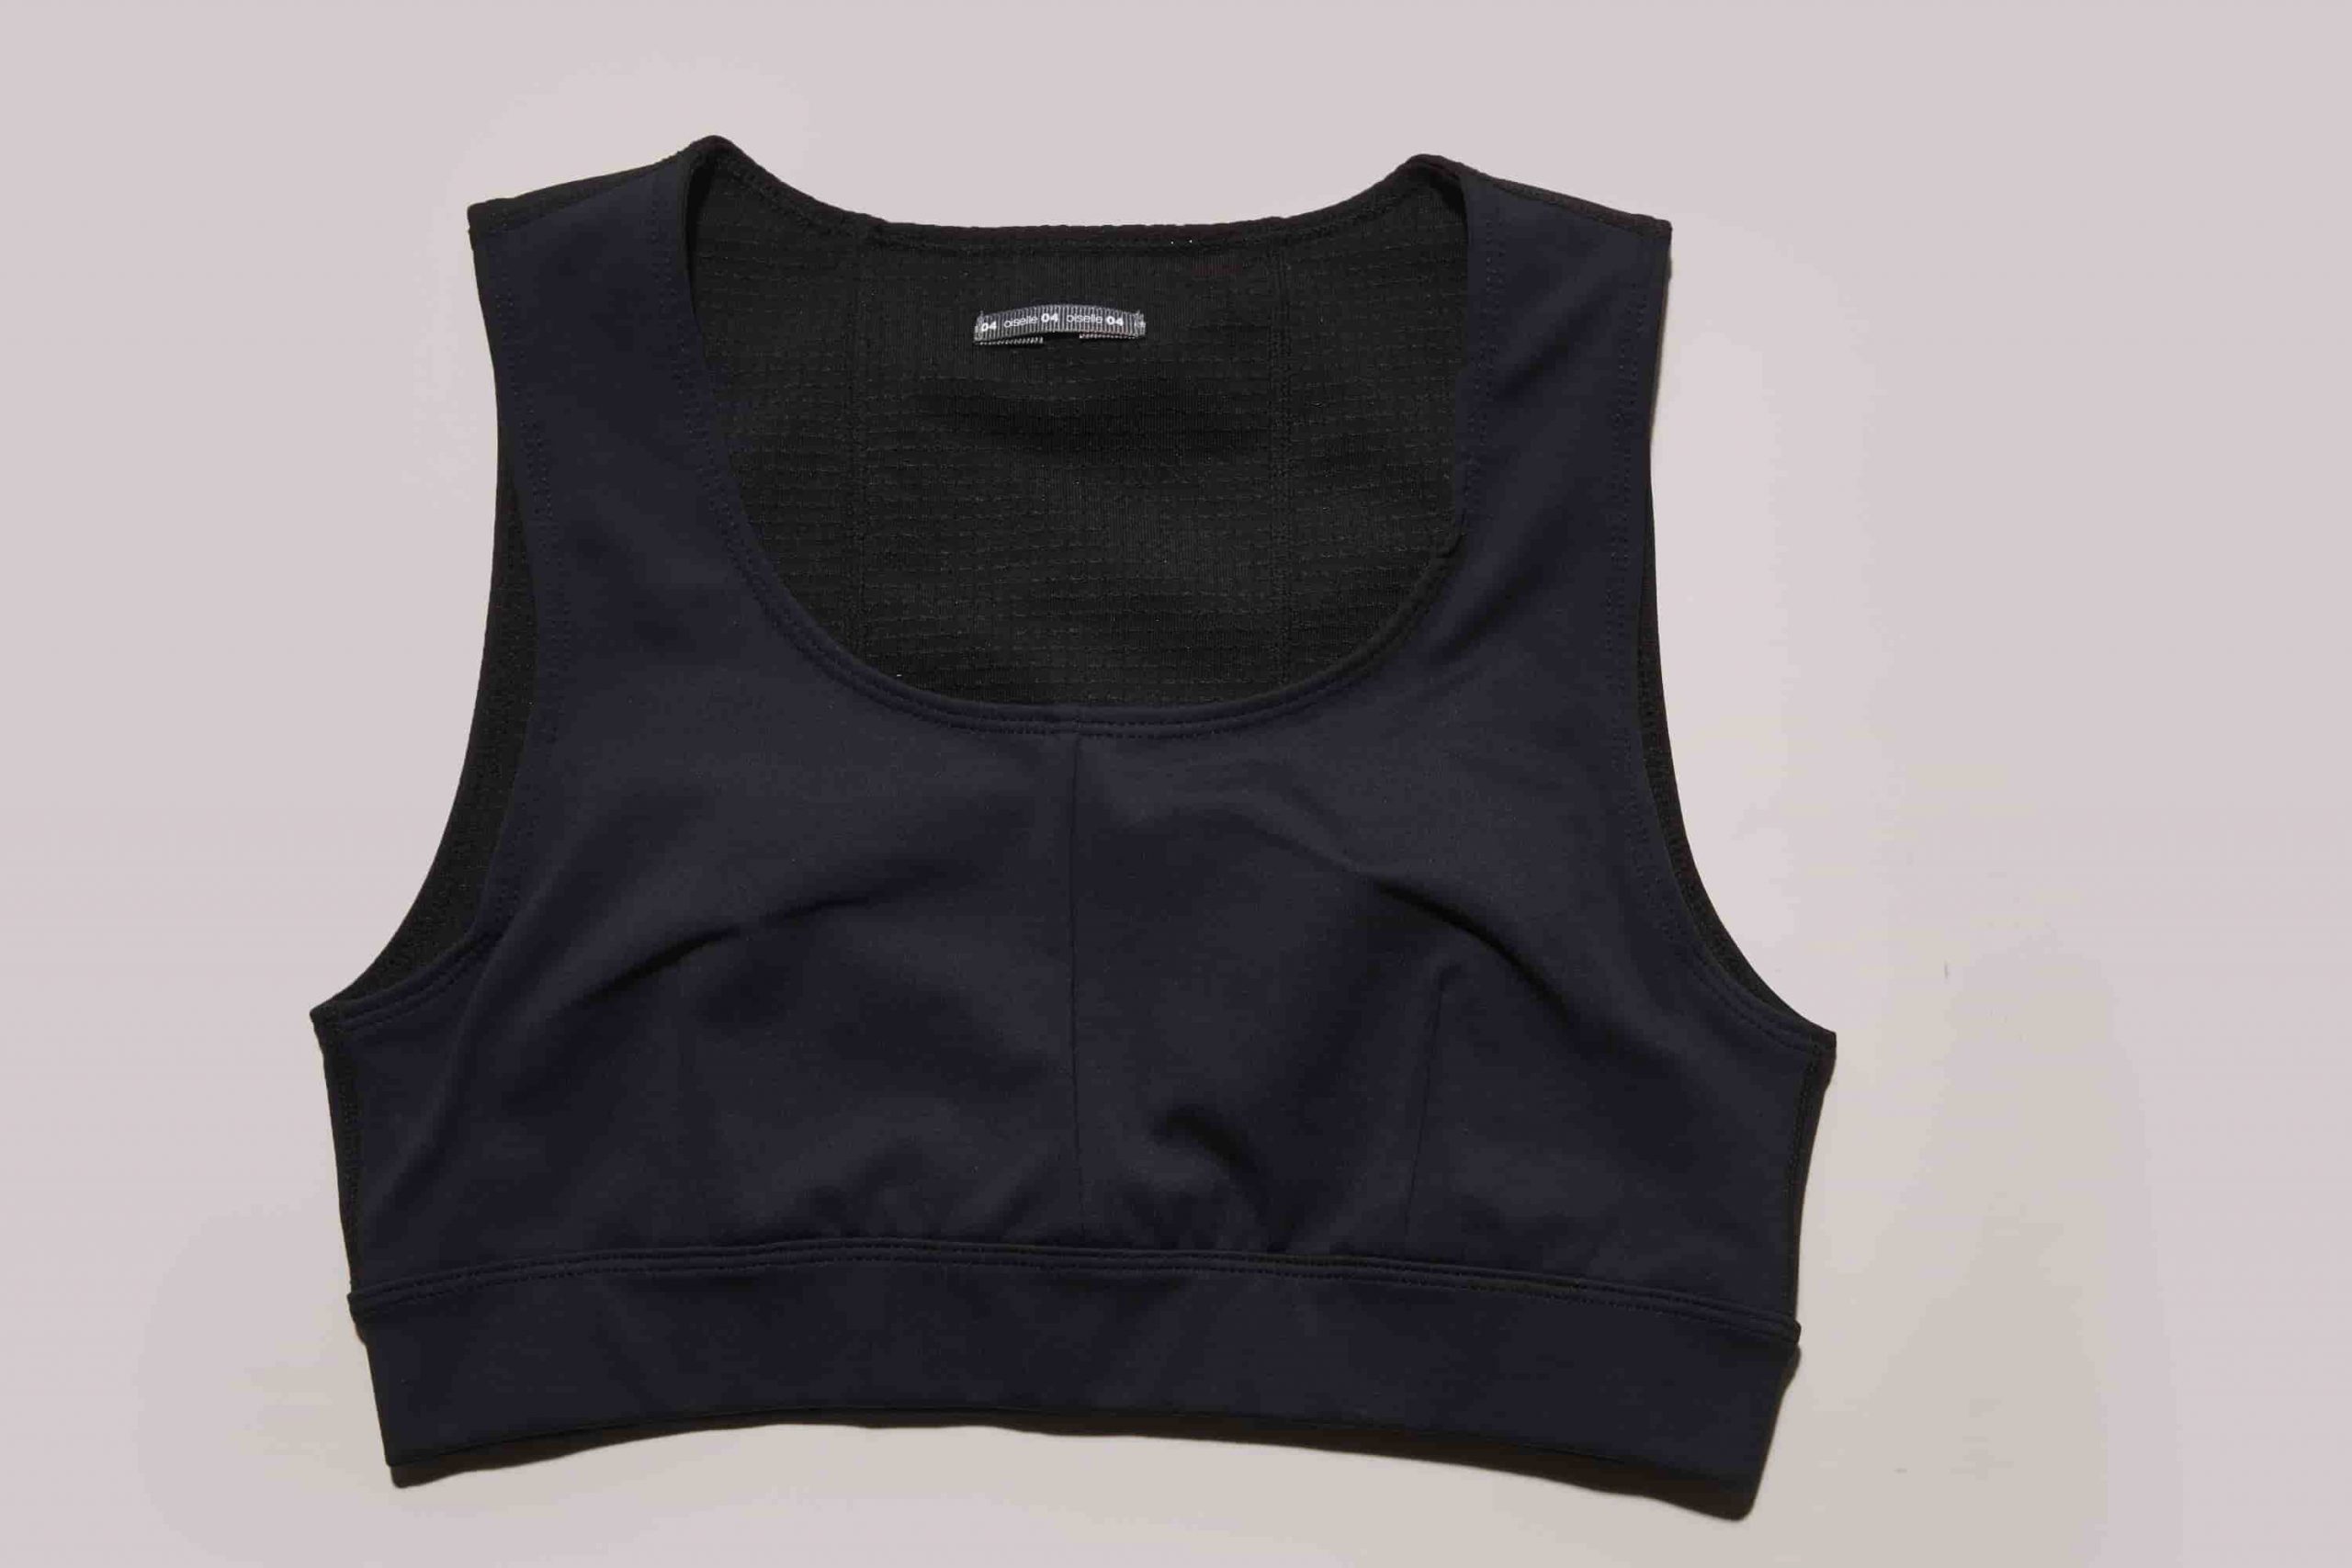 Best Sports Bra for Running with Pockets